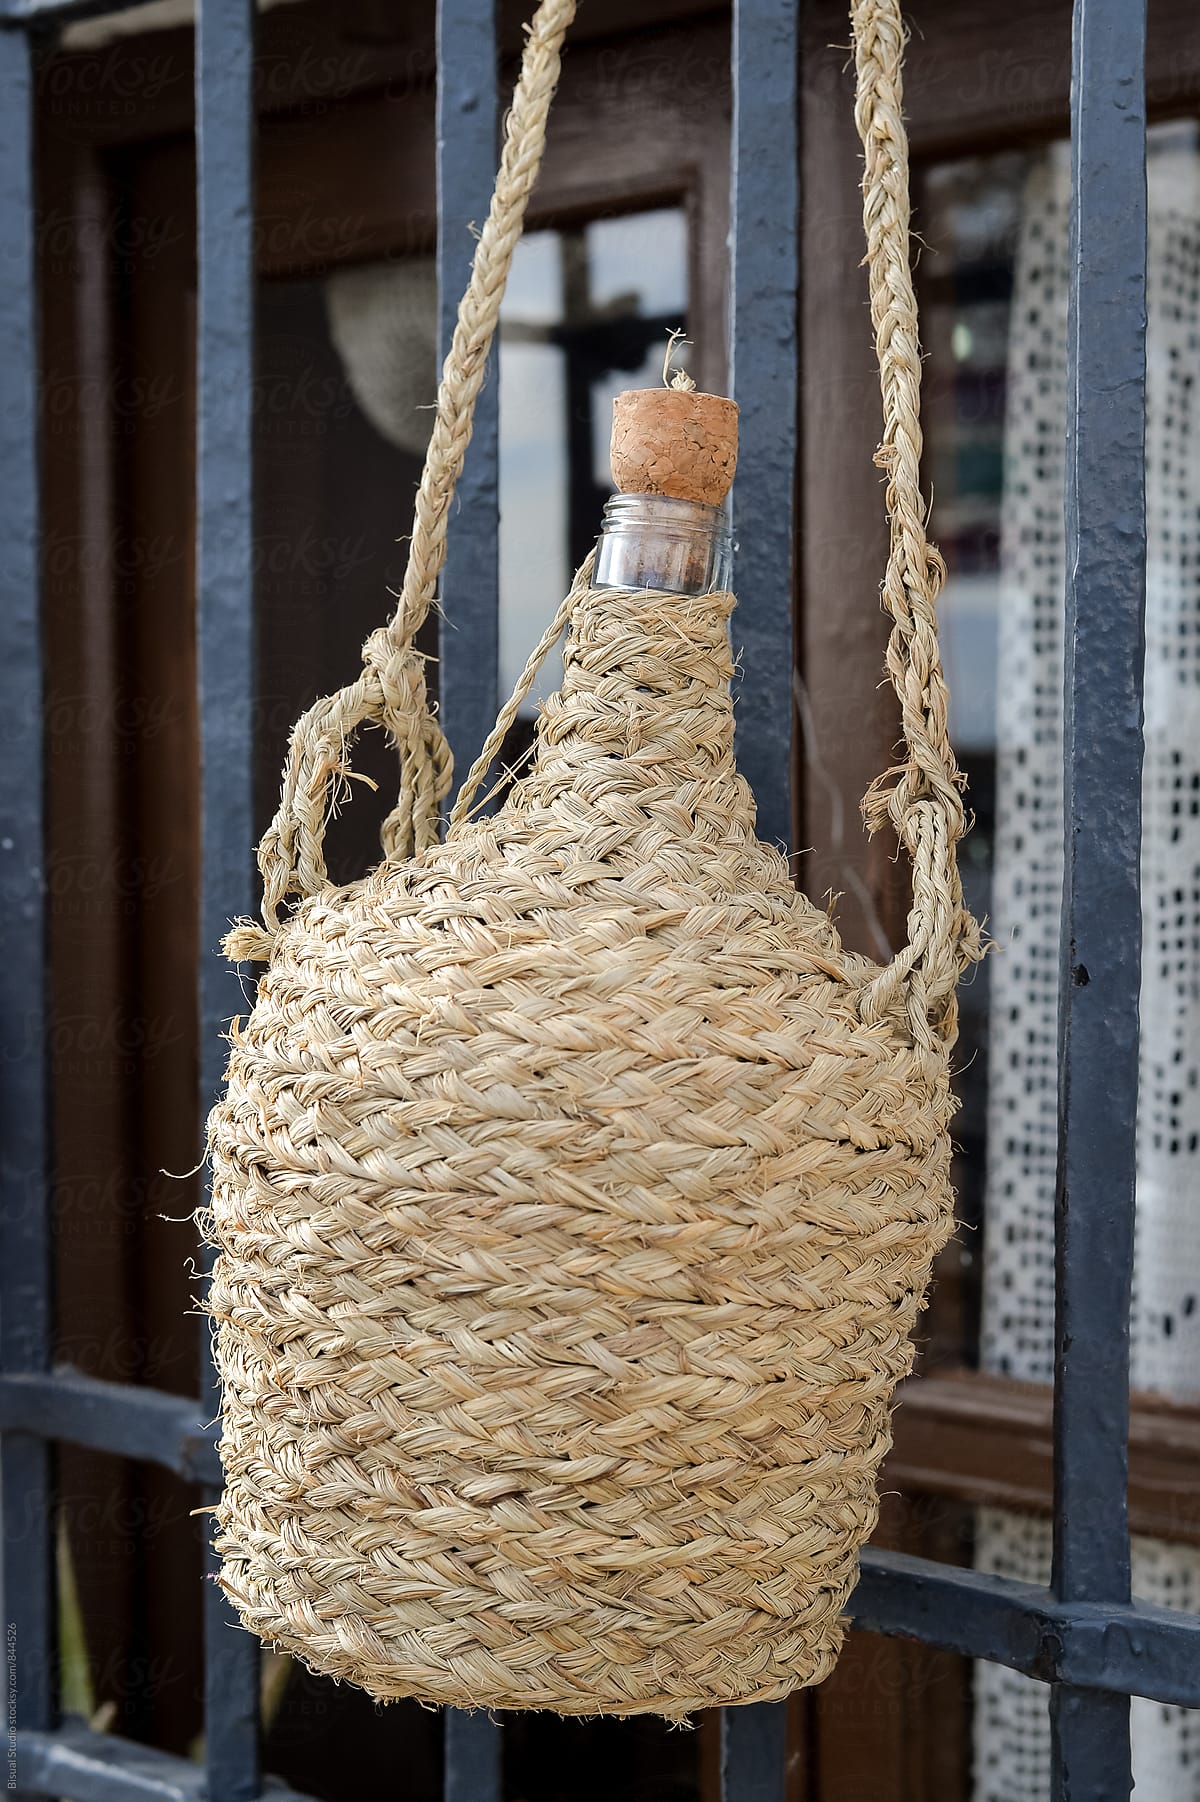 Typical andalusian demijohn with a cover made of straw